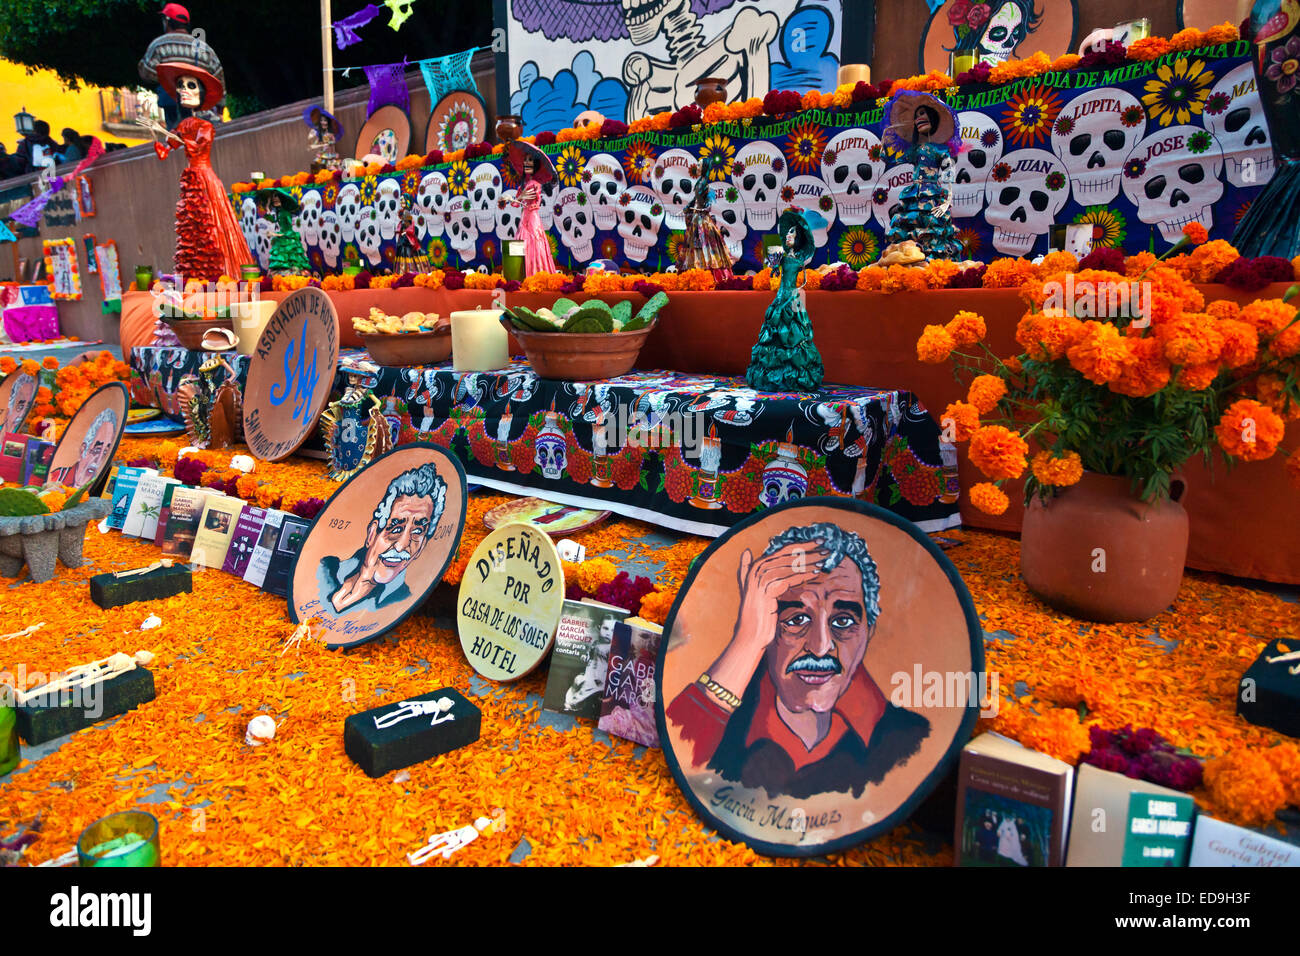 An ALTAR for the author GARCIA MARQUEZ  in the JARDIN during DAY OF THE DEAD 2014 -  SAN MIGUEL DE ALLENDE, MEXICO Stock Photo